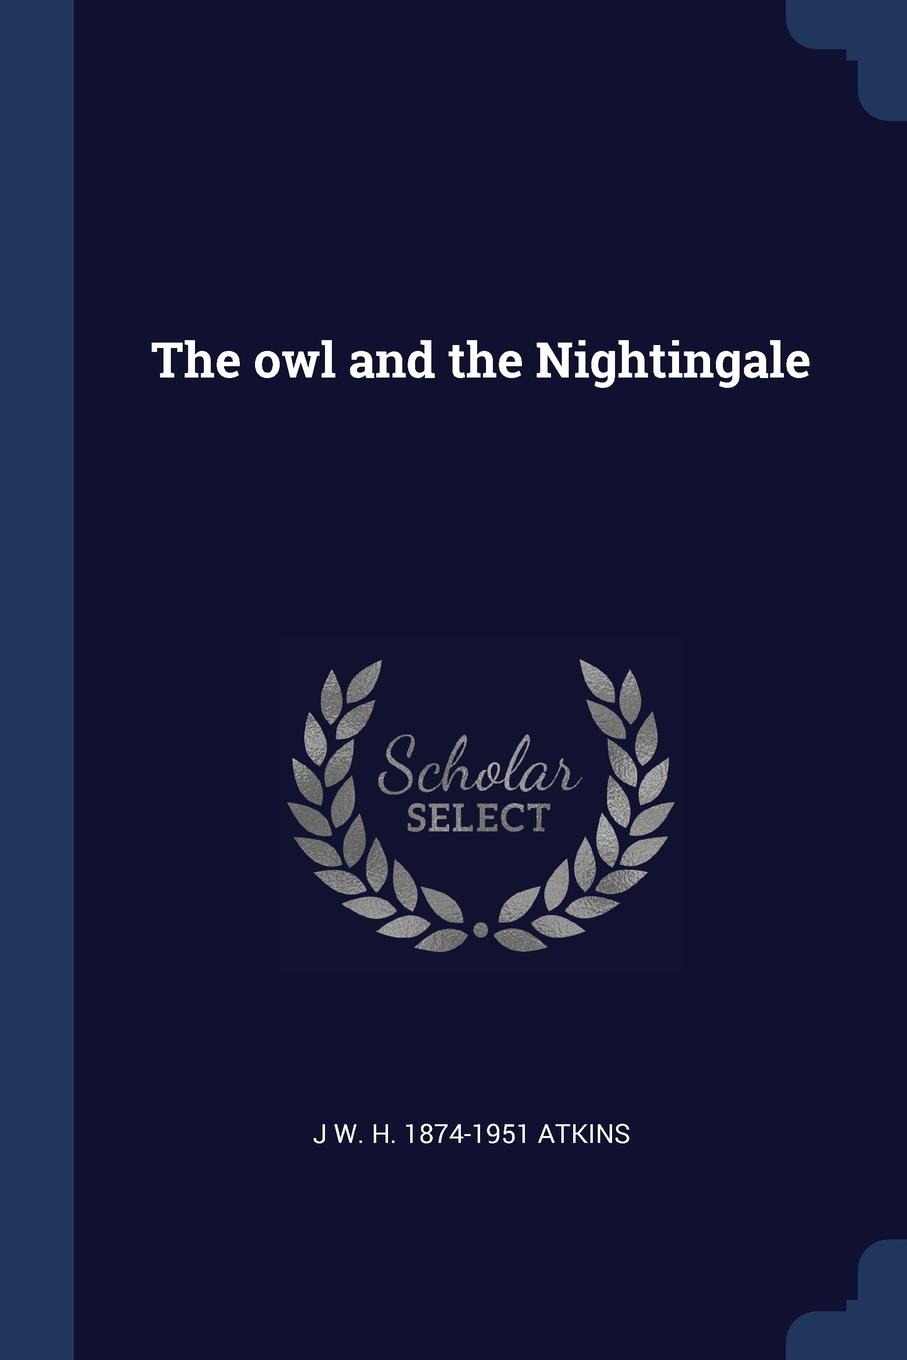 The owl and the Nightingale